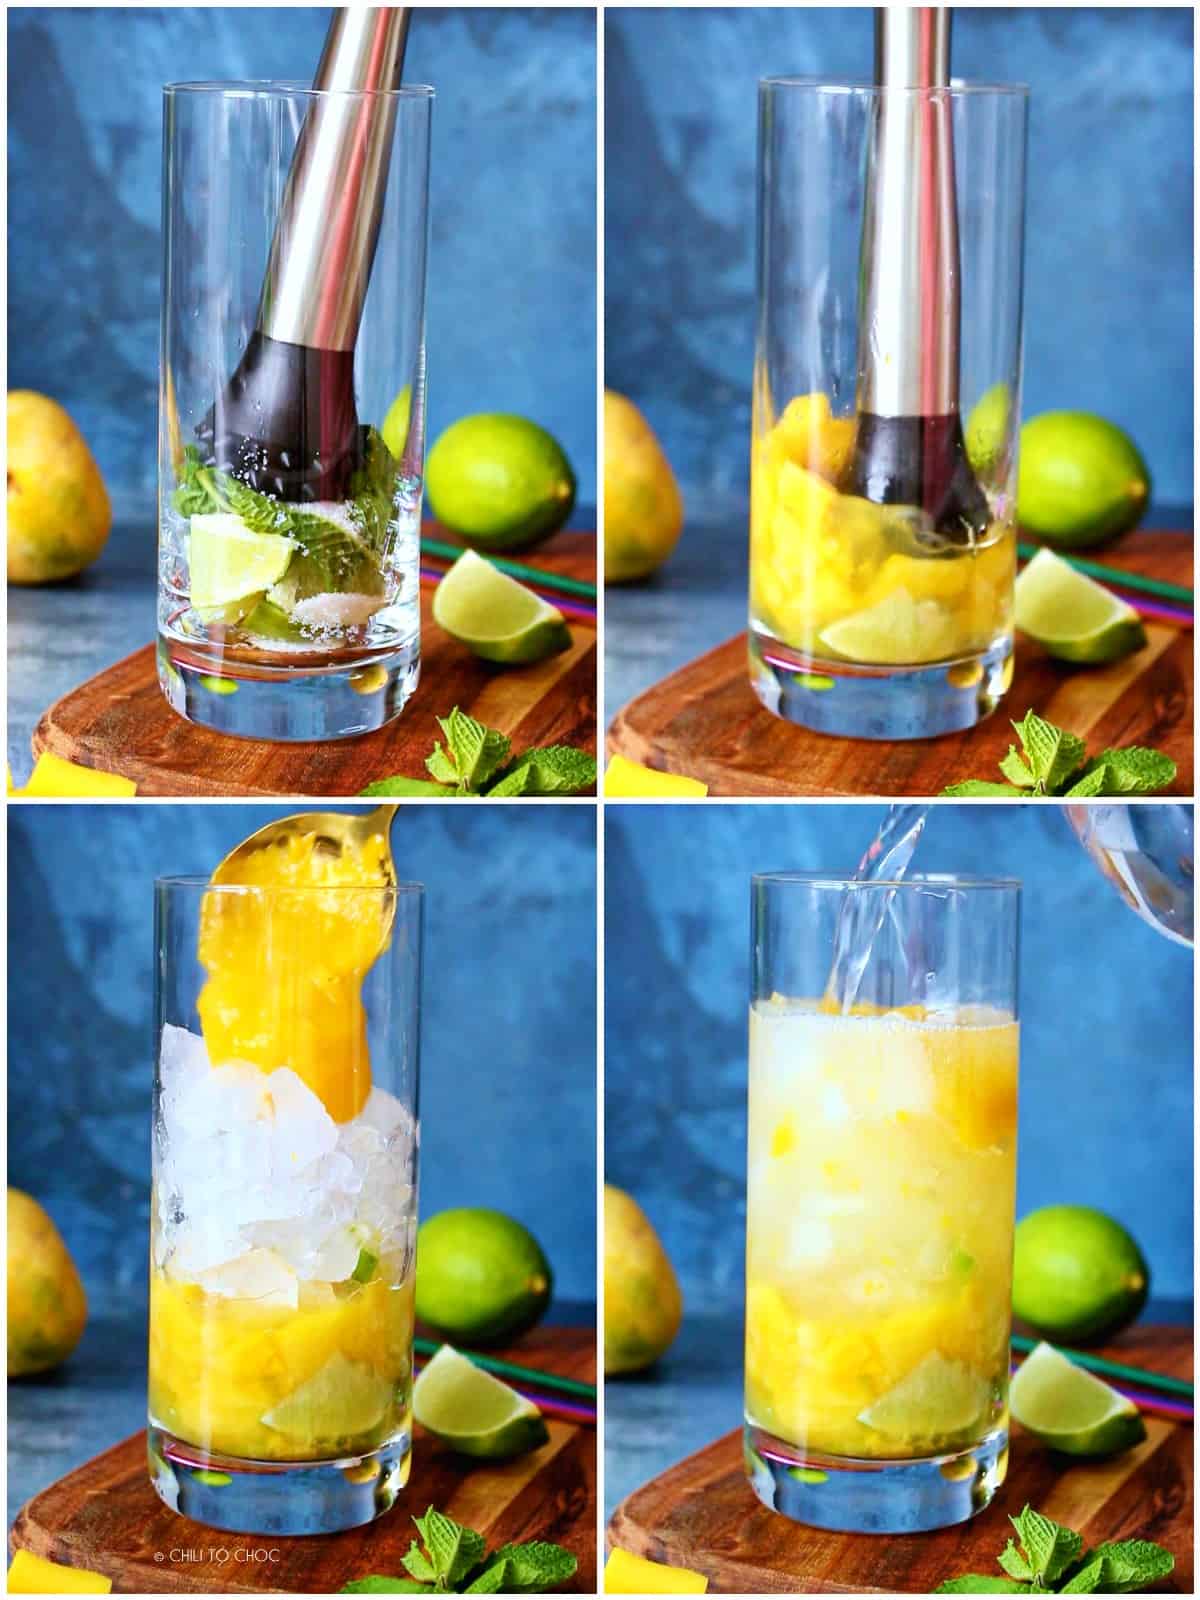 Step by step instructions for making mango mojito mocktail.